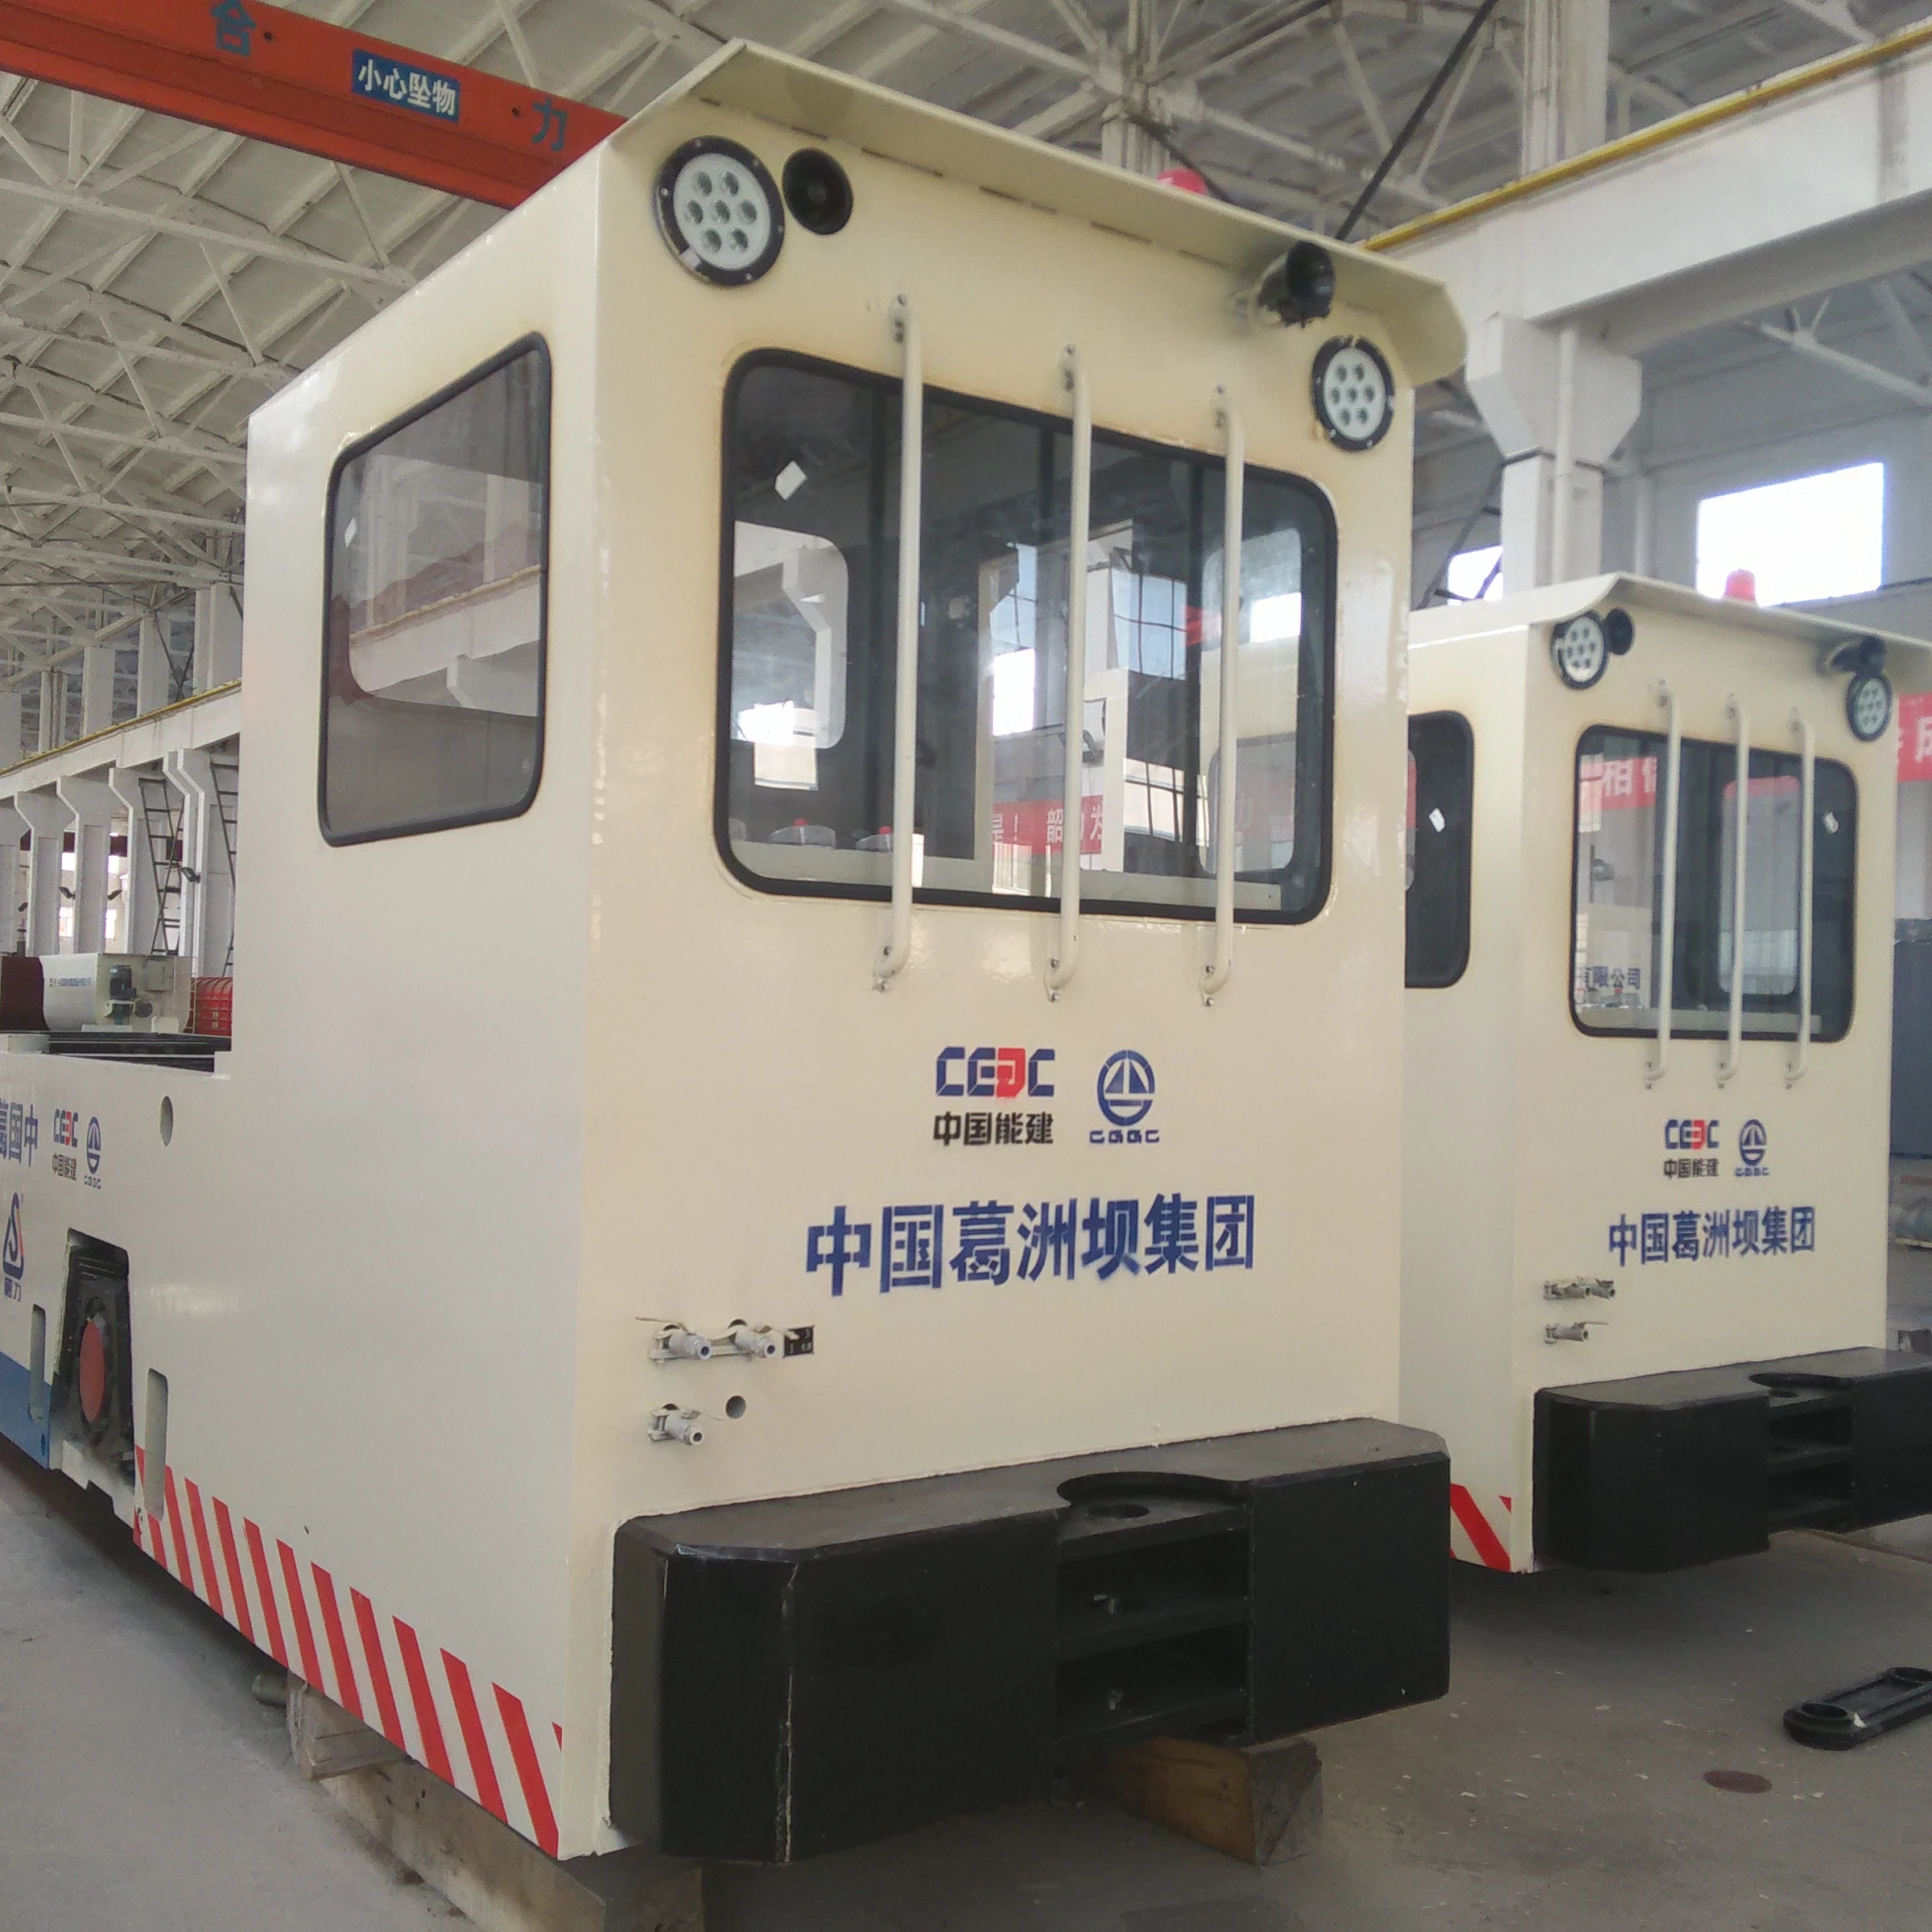 Chinese mining electric locomotive used for sale offering on site troubleshooting after sales service (1600364916851)